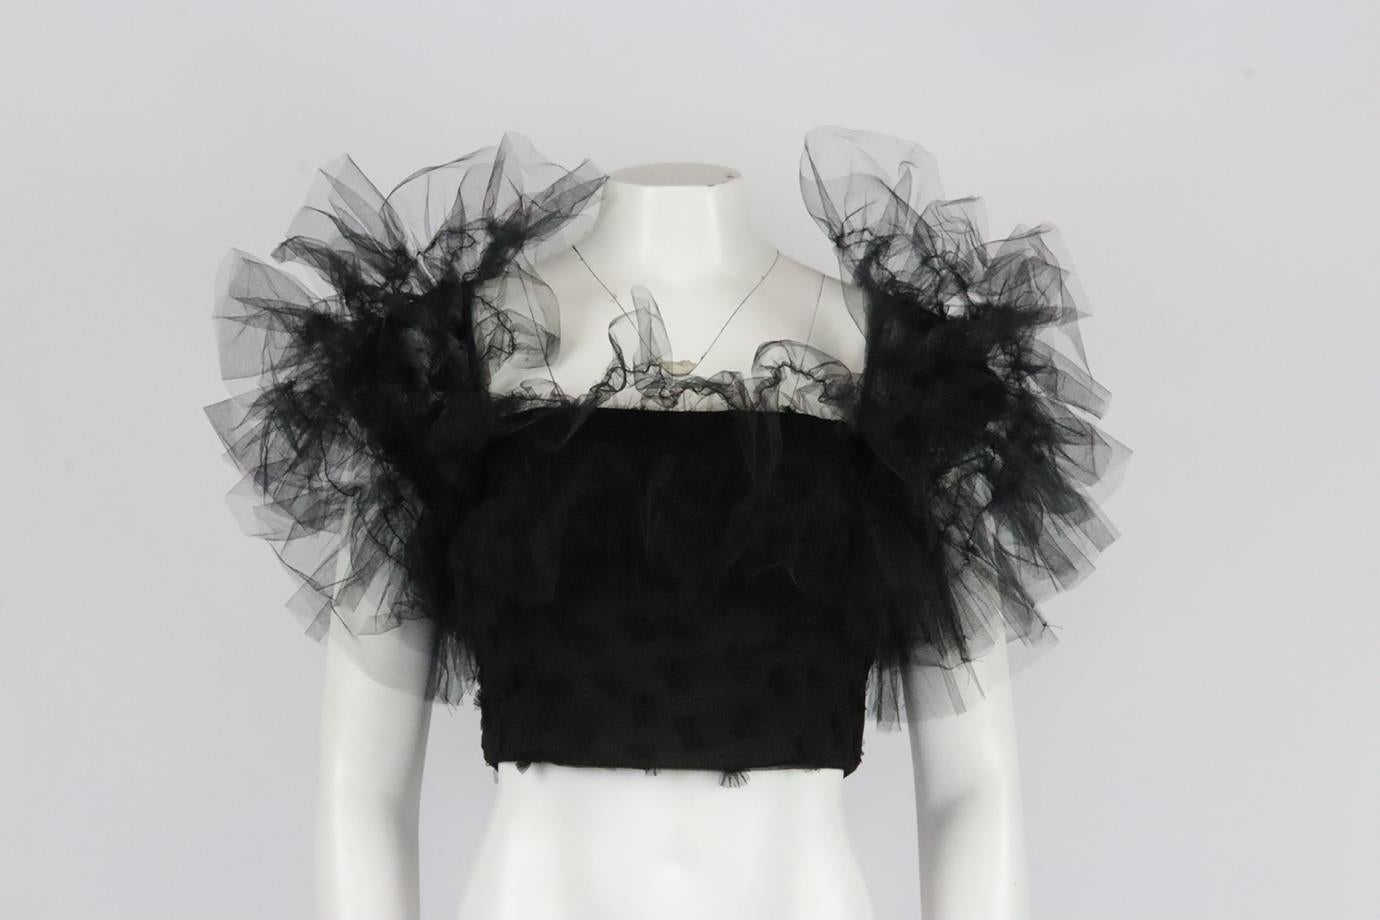 Rodarte cropped bow detailed tulle top. Black. Sleeveless, v-neck. Zip fastening at back. 35% Polyamide, 35% nylon, 30% silk; lining: 100% silk. Size: Medium (UK 10, US 6, FR 38, IT 42). Bust: 30.1 in. Waist: 27.1 in. Length: 9.8 in. New with tags